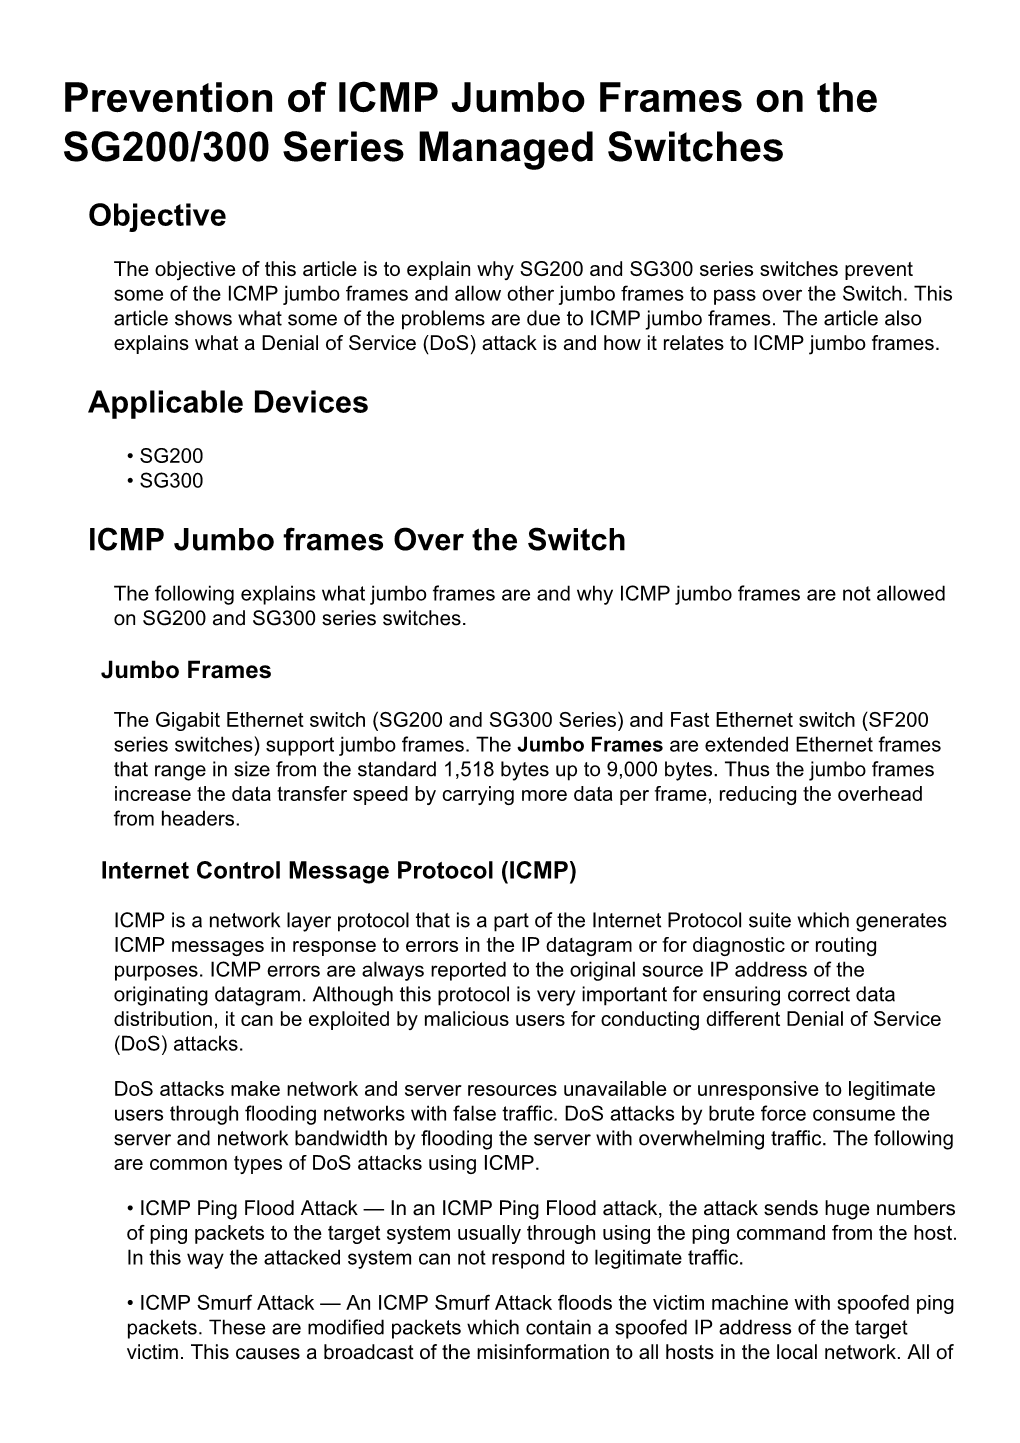 Prevention of ICMP Jumbo Frames on the SG200/300 Series Managed Switches